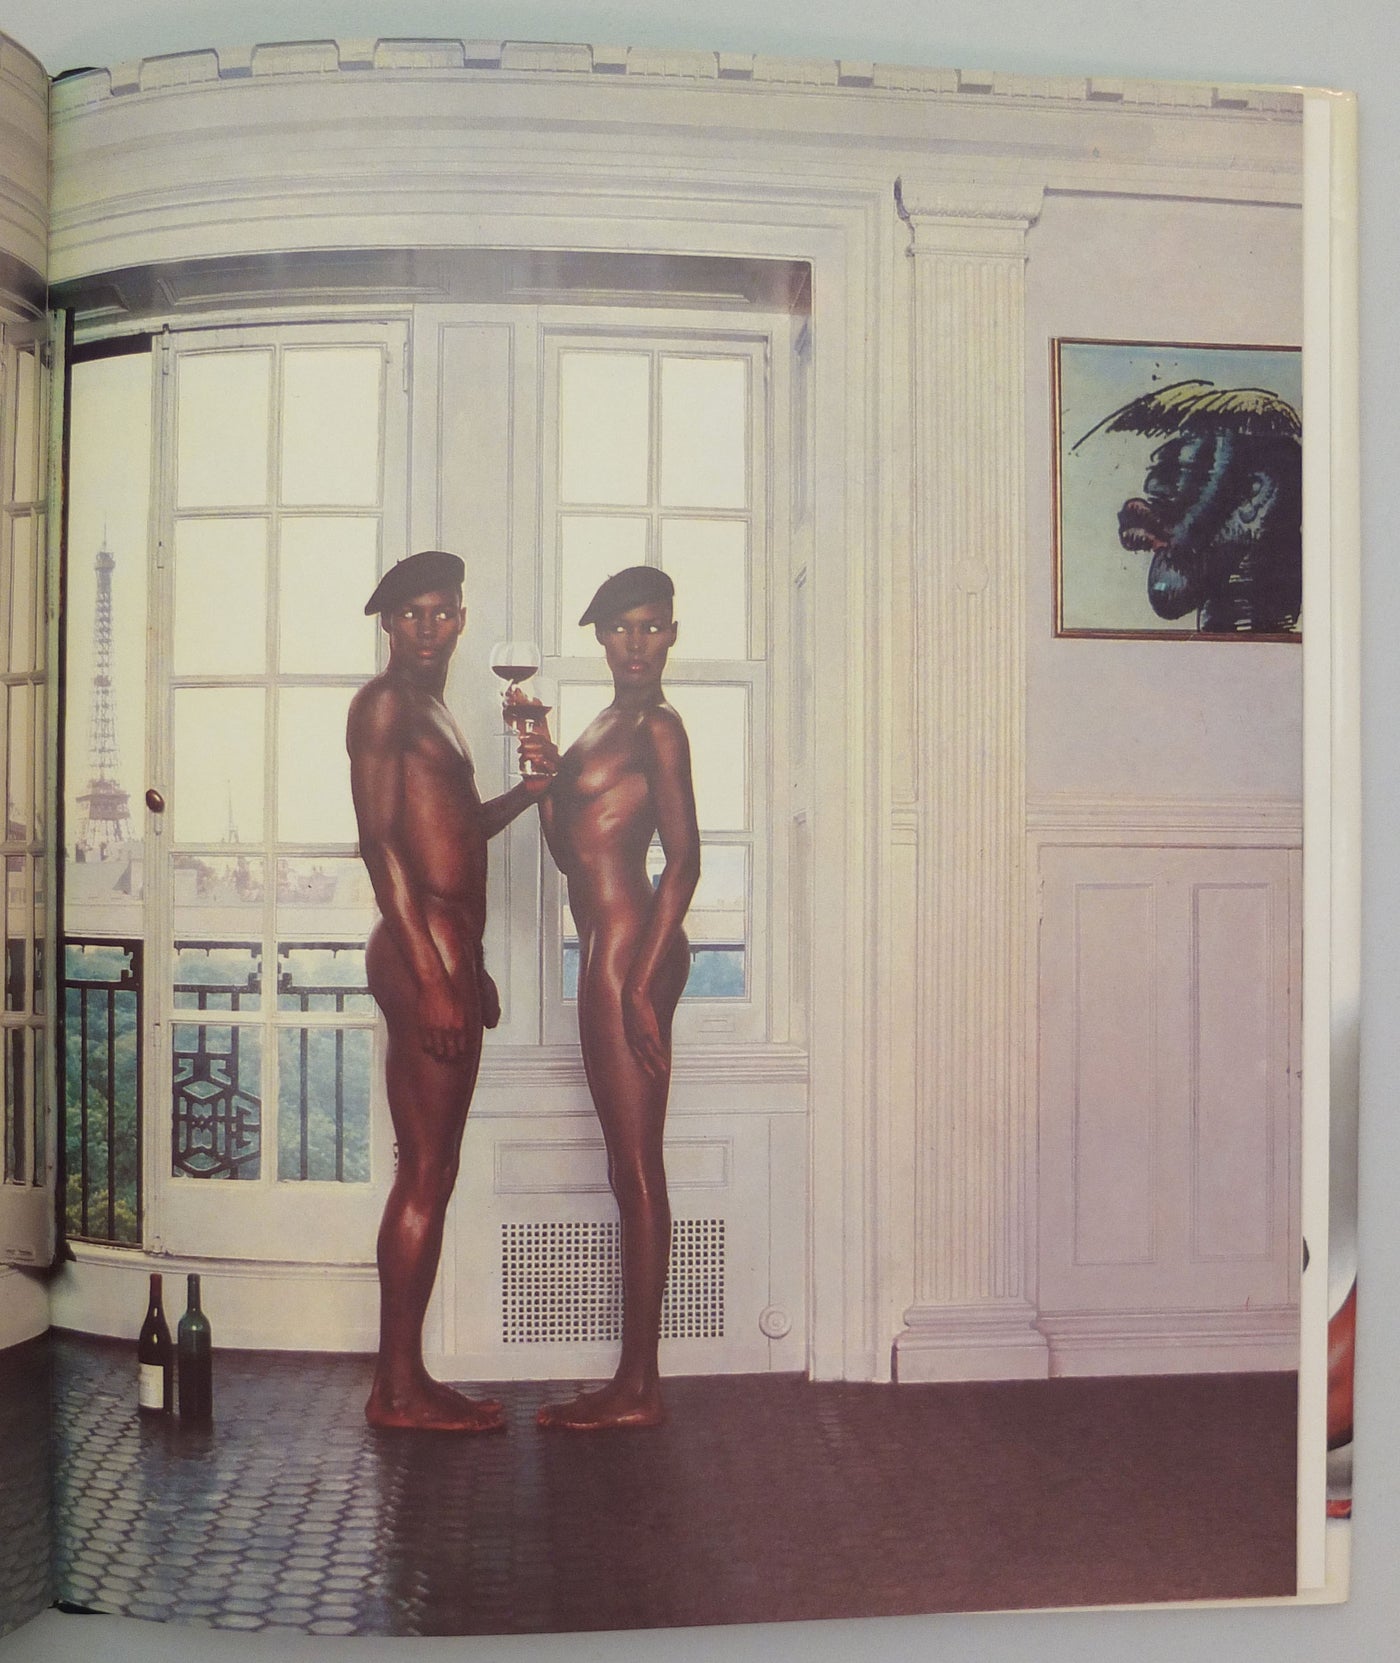 Jungle Fever by Jean Paul Goude}